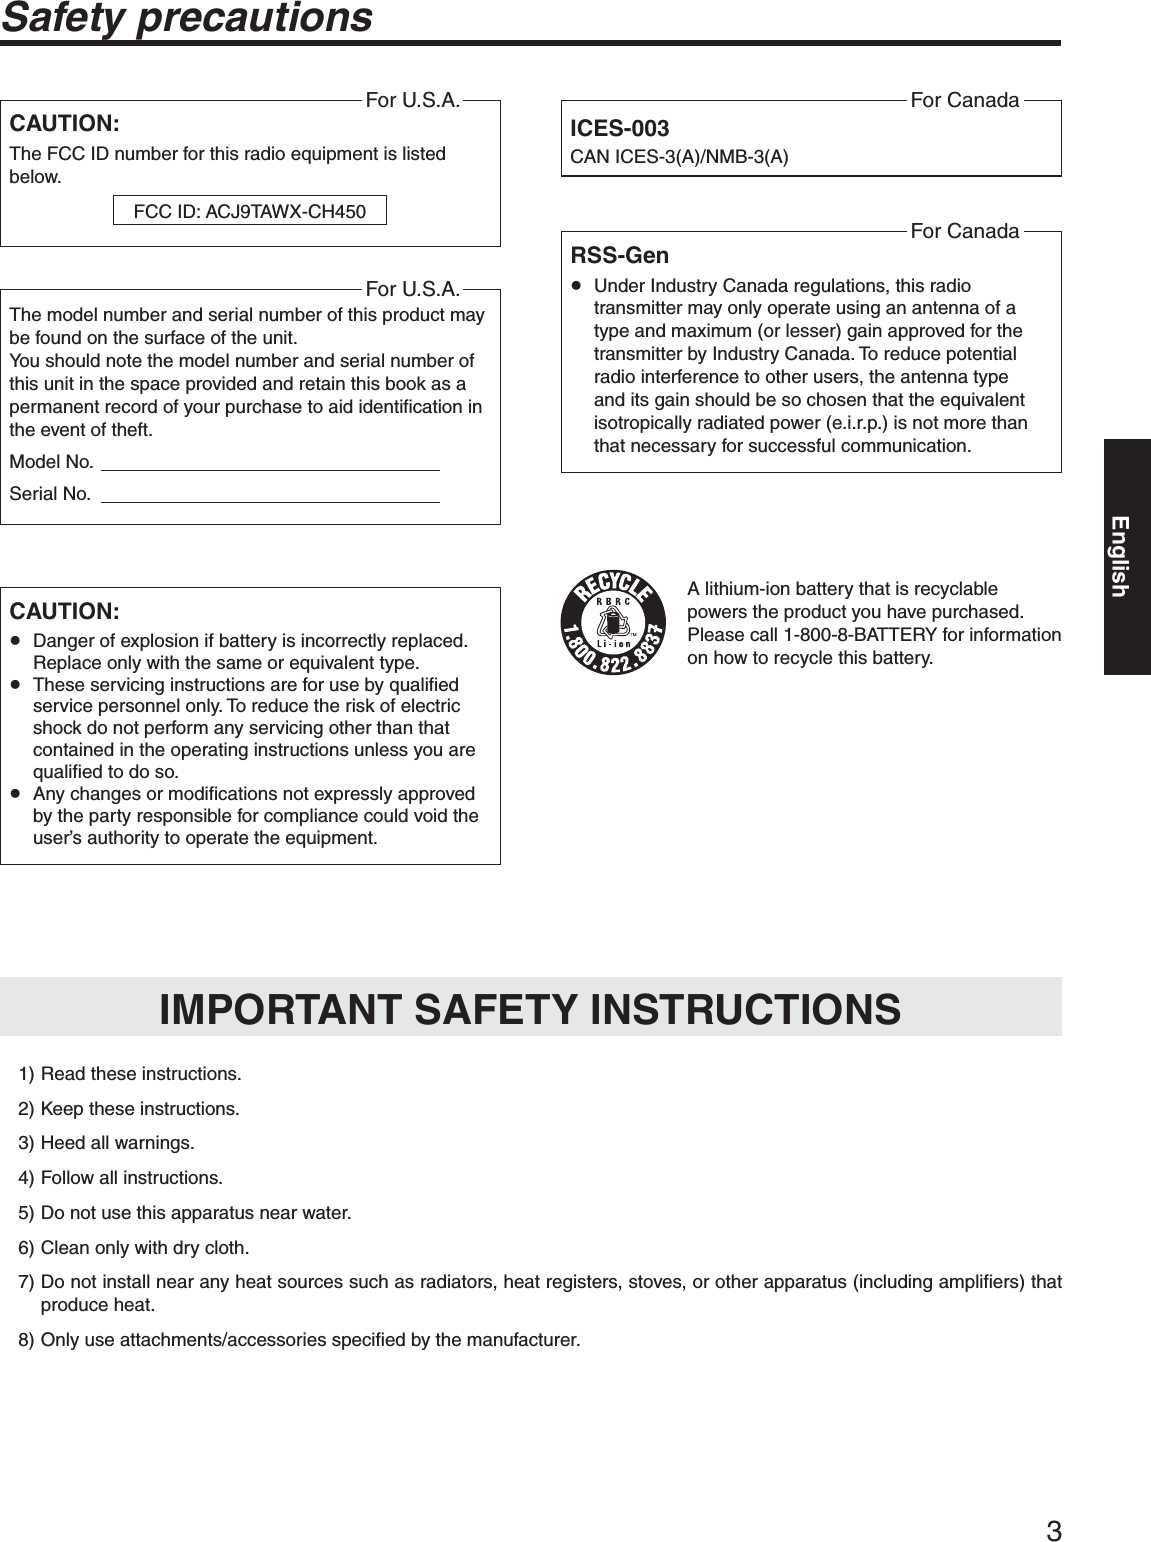 3Safety precautionsCAUTION:The FCC ID number for this radio equipment is listed below.For U.S.A.FCC ID: ACJ9TAWX-CH450CAUTION:p Danger of explosion if battery is incorrectly replaced. Replace only with the same or equivalent type.p These servicing instructions are for use by qualified service personnel only. To reduce the risk of electric shock do not perform any servicing other than that contained in the operating instructions unless you are qualified to do so.p Any changes or modifications not expressly approved by the party responsible for compliance could void the user’s authority to operate the equipment.ICES-003CAN ICES-3(A)/NMB-3(A)For CanadaA lithium-ion battery that is recyclable powers the product you have purchased. Please call 1-800-8-BATTERY for information on how to recycle this battery.  1) Read these instructions.  2) Keep these instructions.  3) Heed all warnings.  4) Follow all instructions.  5) Do not use this apparatus near water.  6) Clean only with dry cloth. 7)  Do not install near any heat sources such as radiators, heat registers, stoves, or other apparatus (including amplifiers) that produce heat. 8)  Only use attachments/accessories specified by the manufacturer.IMPORTANT SAFETY INSTRUCTIONSRSS-Genp Under Industry Canada regulations, this radio transmitter may only operate using an antenna of a type and maximum (or lesser) gain approved for the transmitter by Industry Canada. To reduce potential radio interference to other users, the antenna type and its gain should be so chosen that the equivalent isotropically radiated power (e.i.r.p.) is not more than that necessary for successful communication.For CanadaThe model number and serial number of this product may be found on the surface of the unit.You should note the model number and serial number of this unit in the space provided and retain this book as a permanent record of your purchase to aid identification in the event of theft.Model No.                                                                   Serial No.                                                                   For U.S.A.English